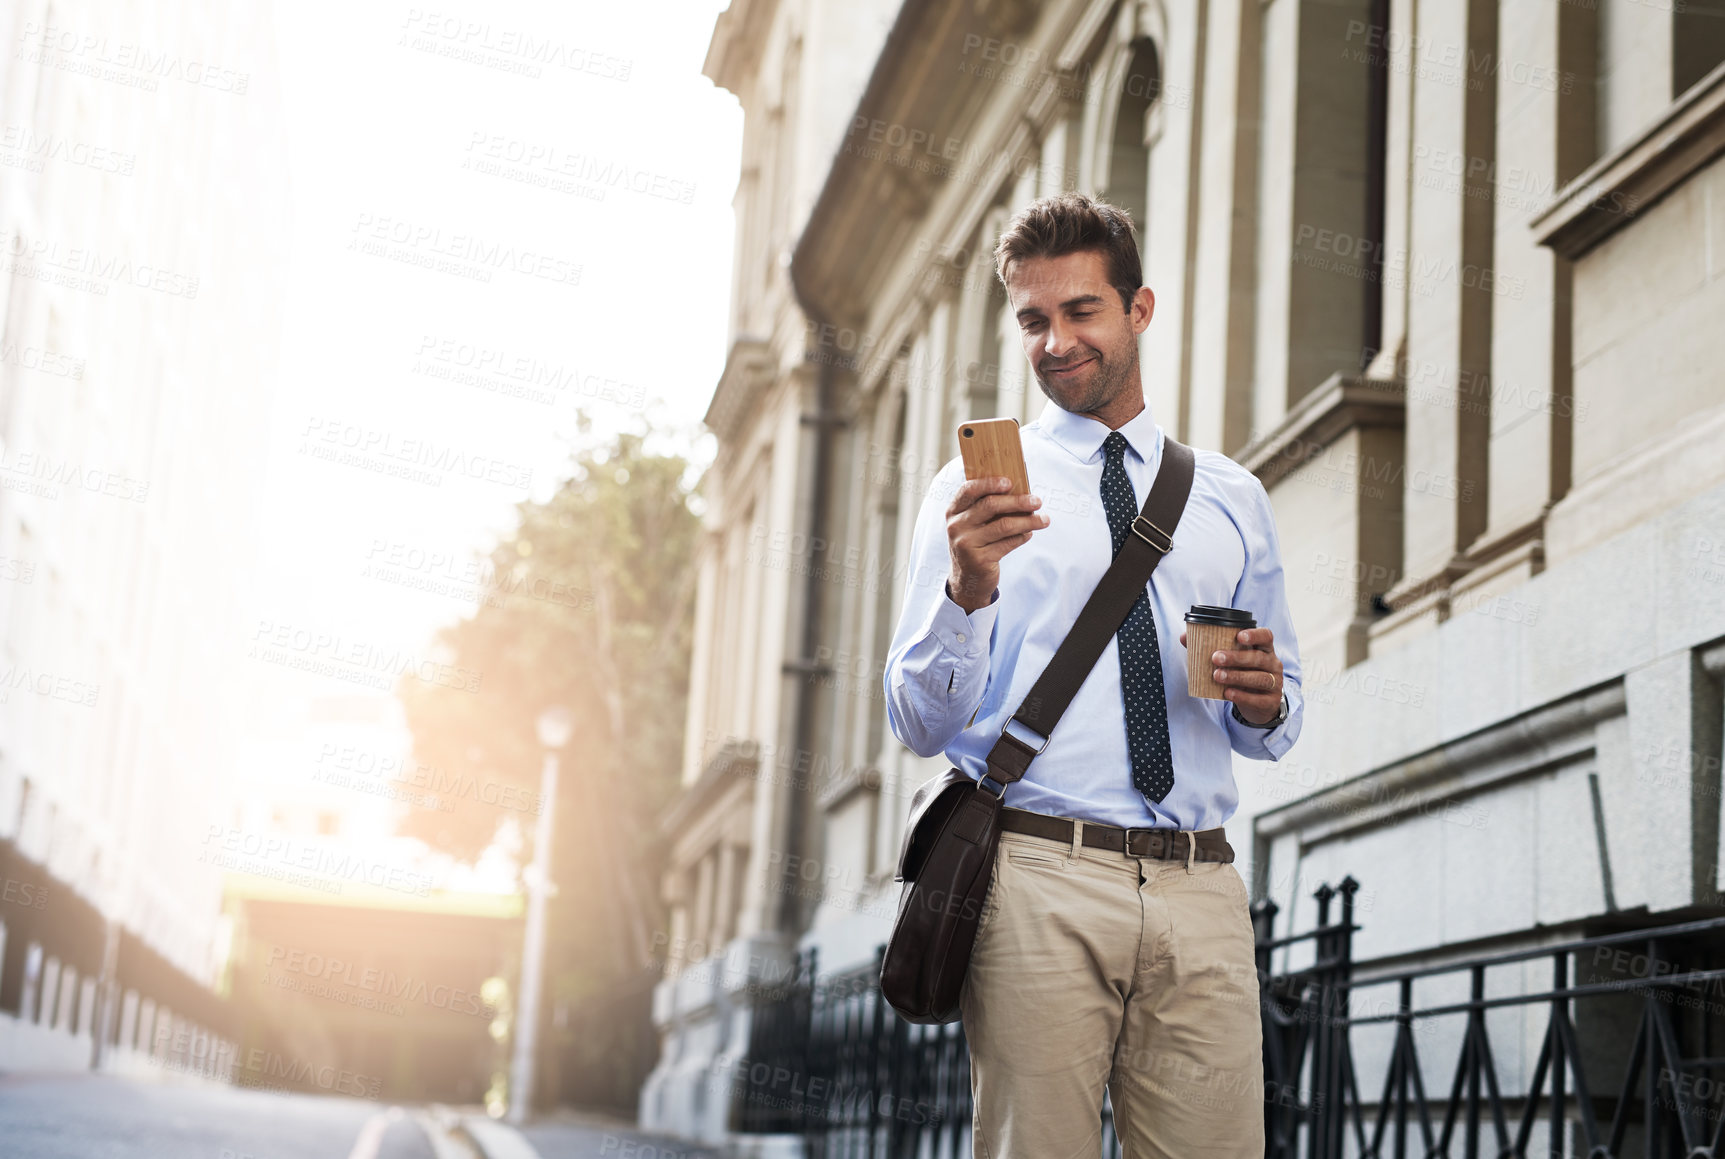 Buy stock photo Shot of a handsome young businessman texting on his cellphone while heading to work in the morning